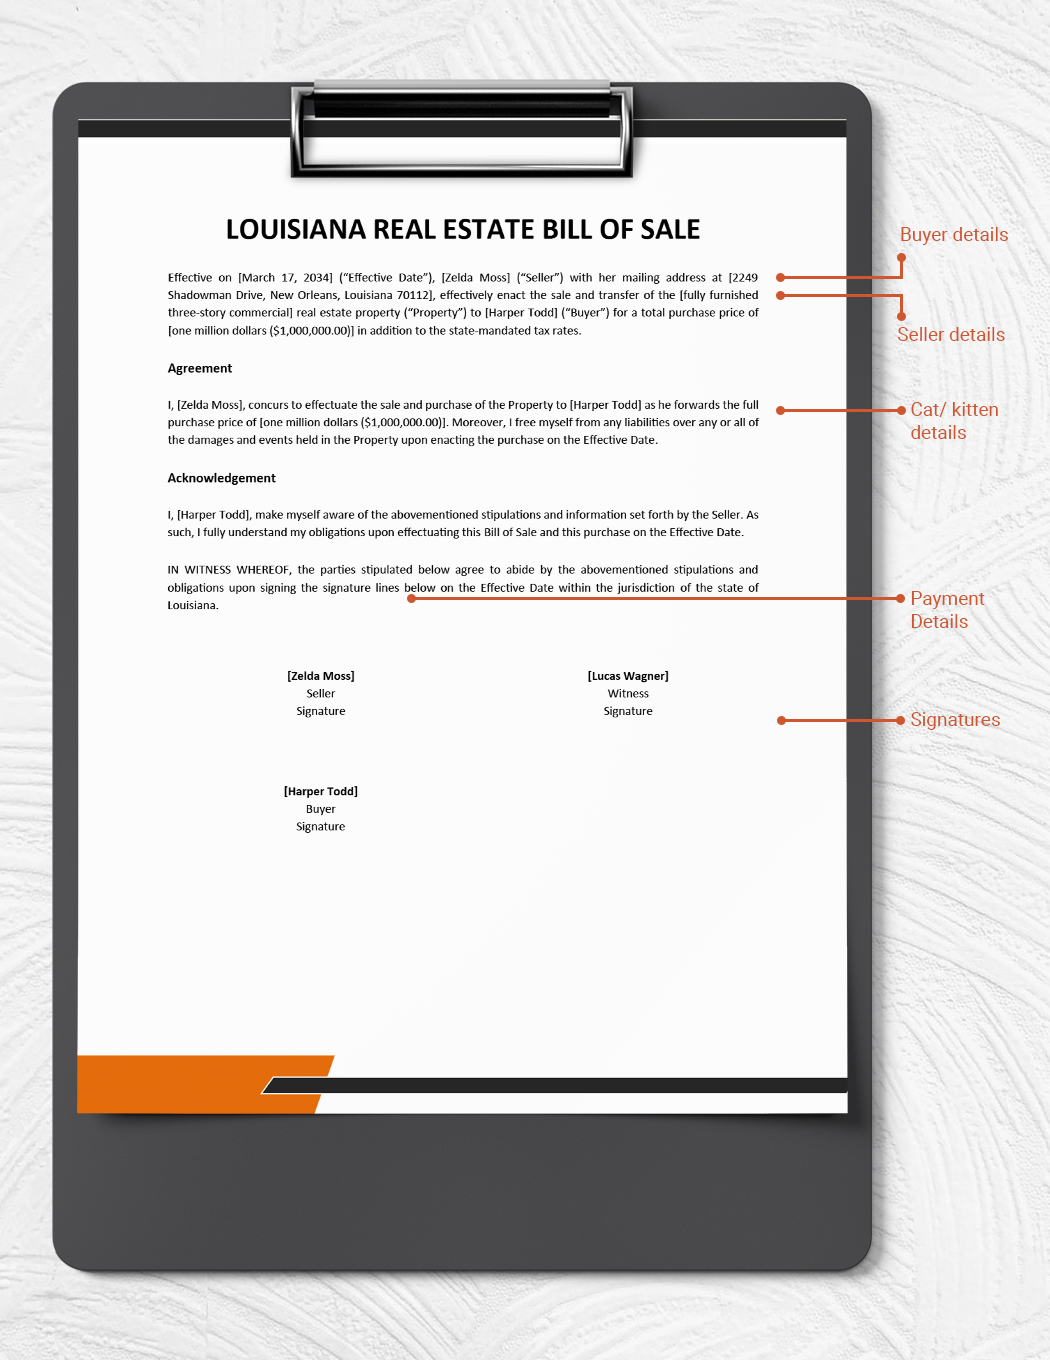 louisiana-real-estate-bill-of-sale-form-template-download-in-word-google-docs-pdf-template